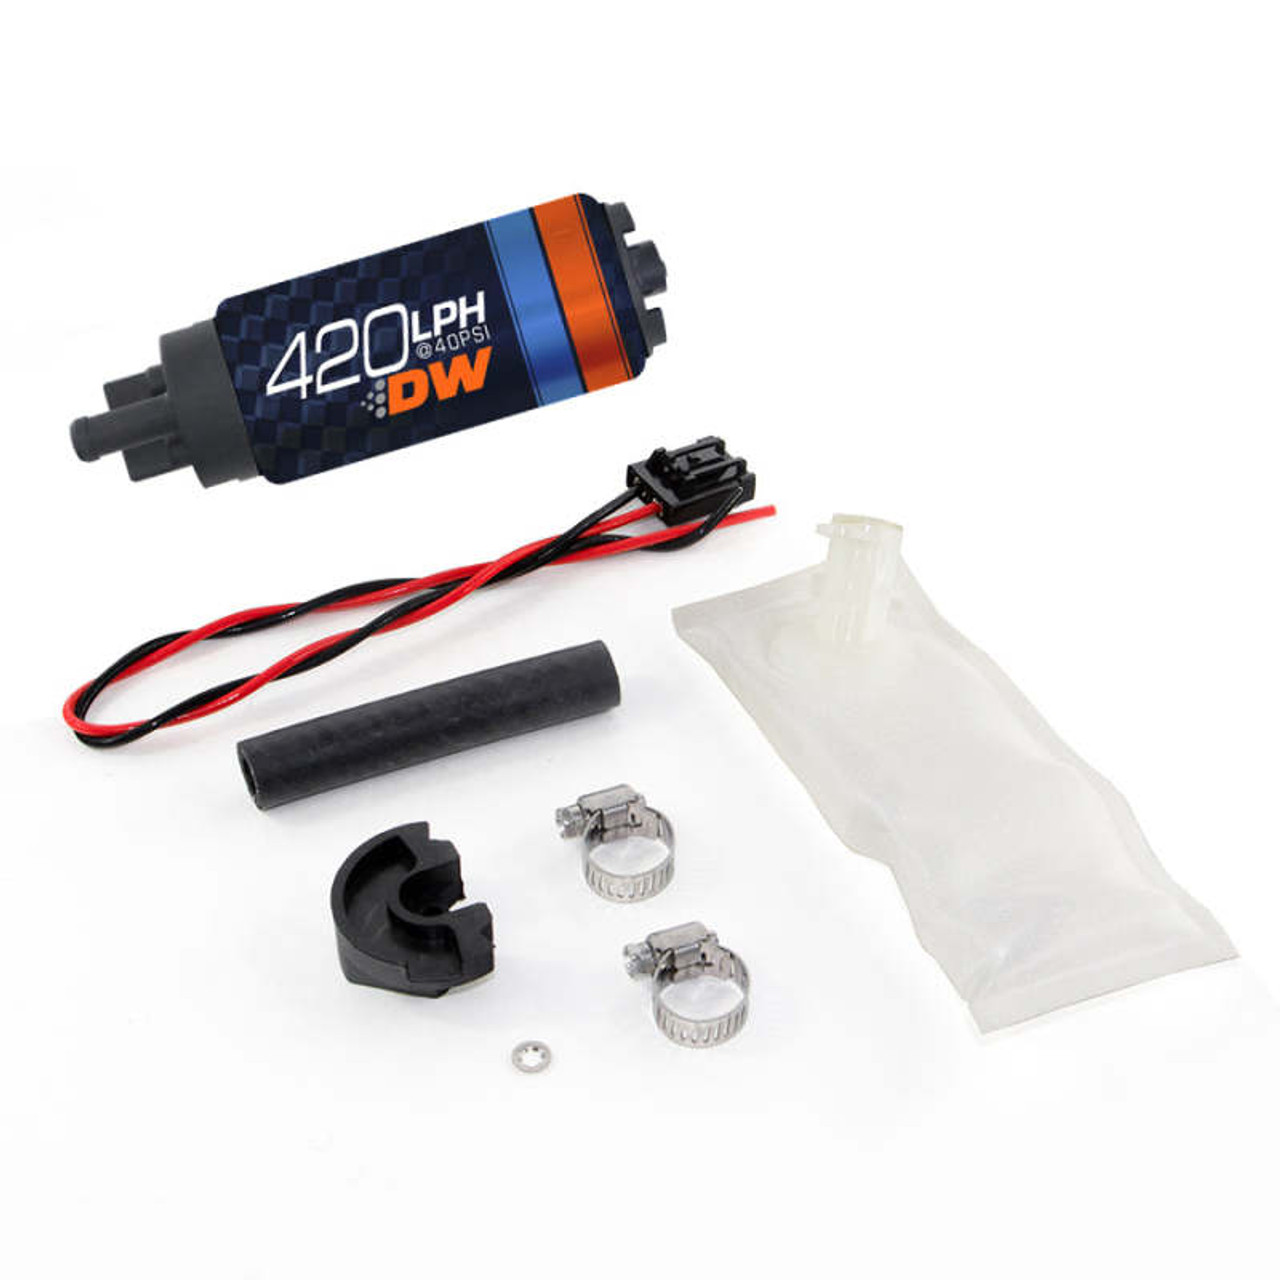 Deatschwerks DW420 Series 420lph In-Tank Fuel Pump w/ Install Kit For 94-02 Nissan S14/S15 - 9-421-1024 Photo - Primary